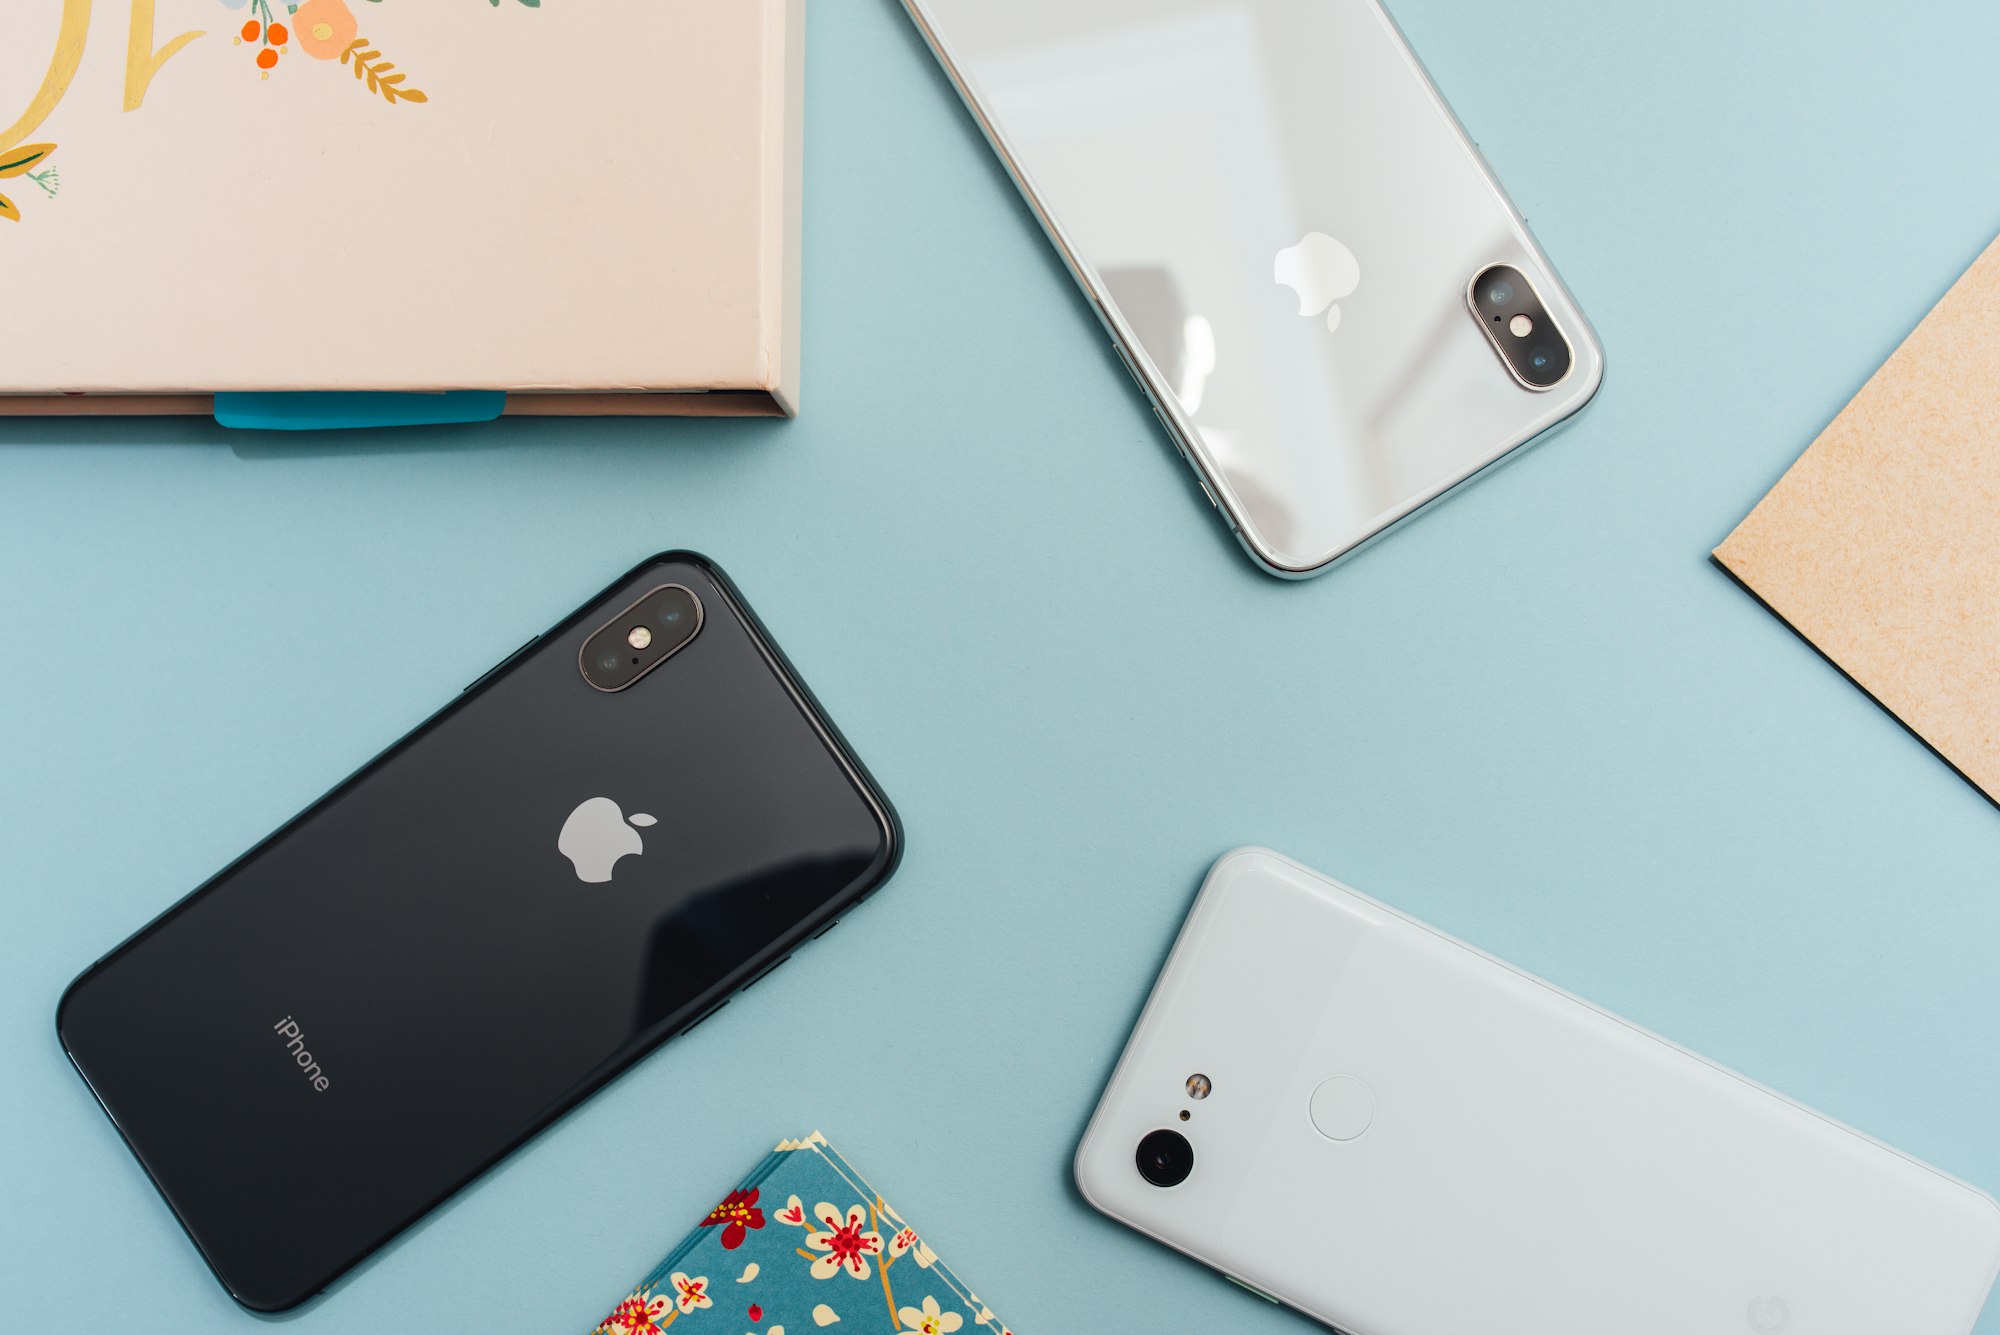 5 Things to Check Before Buying a Used iPhone